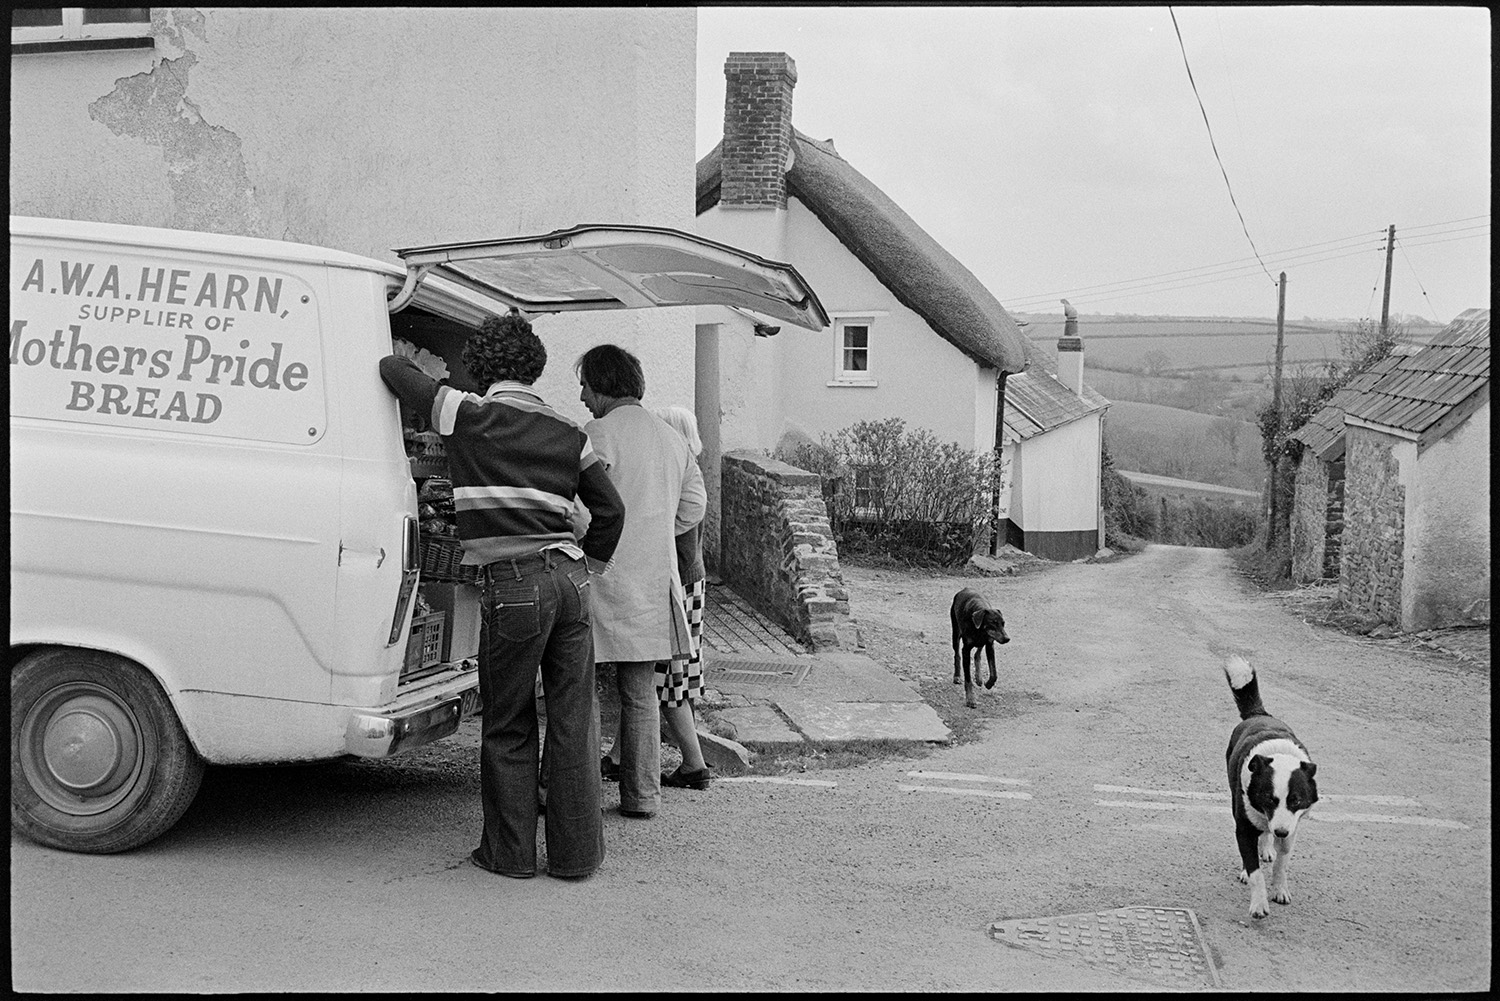 Baker selling from van, horse and children with pram. 
[A woman buying bread from an A W A Hearn baker's van in Roborough. Two dogs are also walking along the street.]